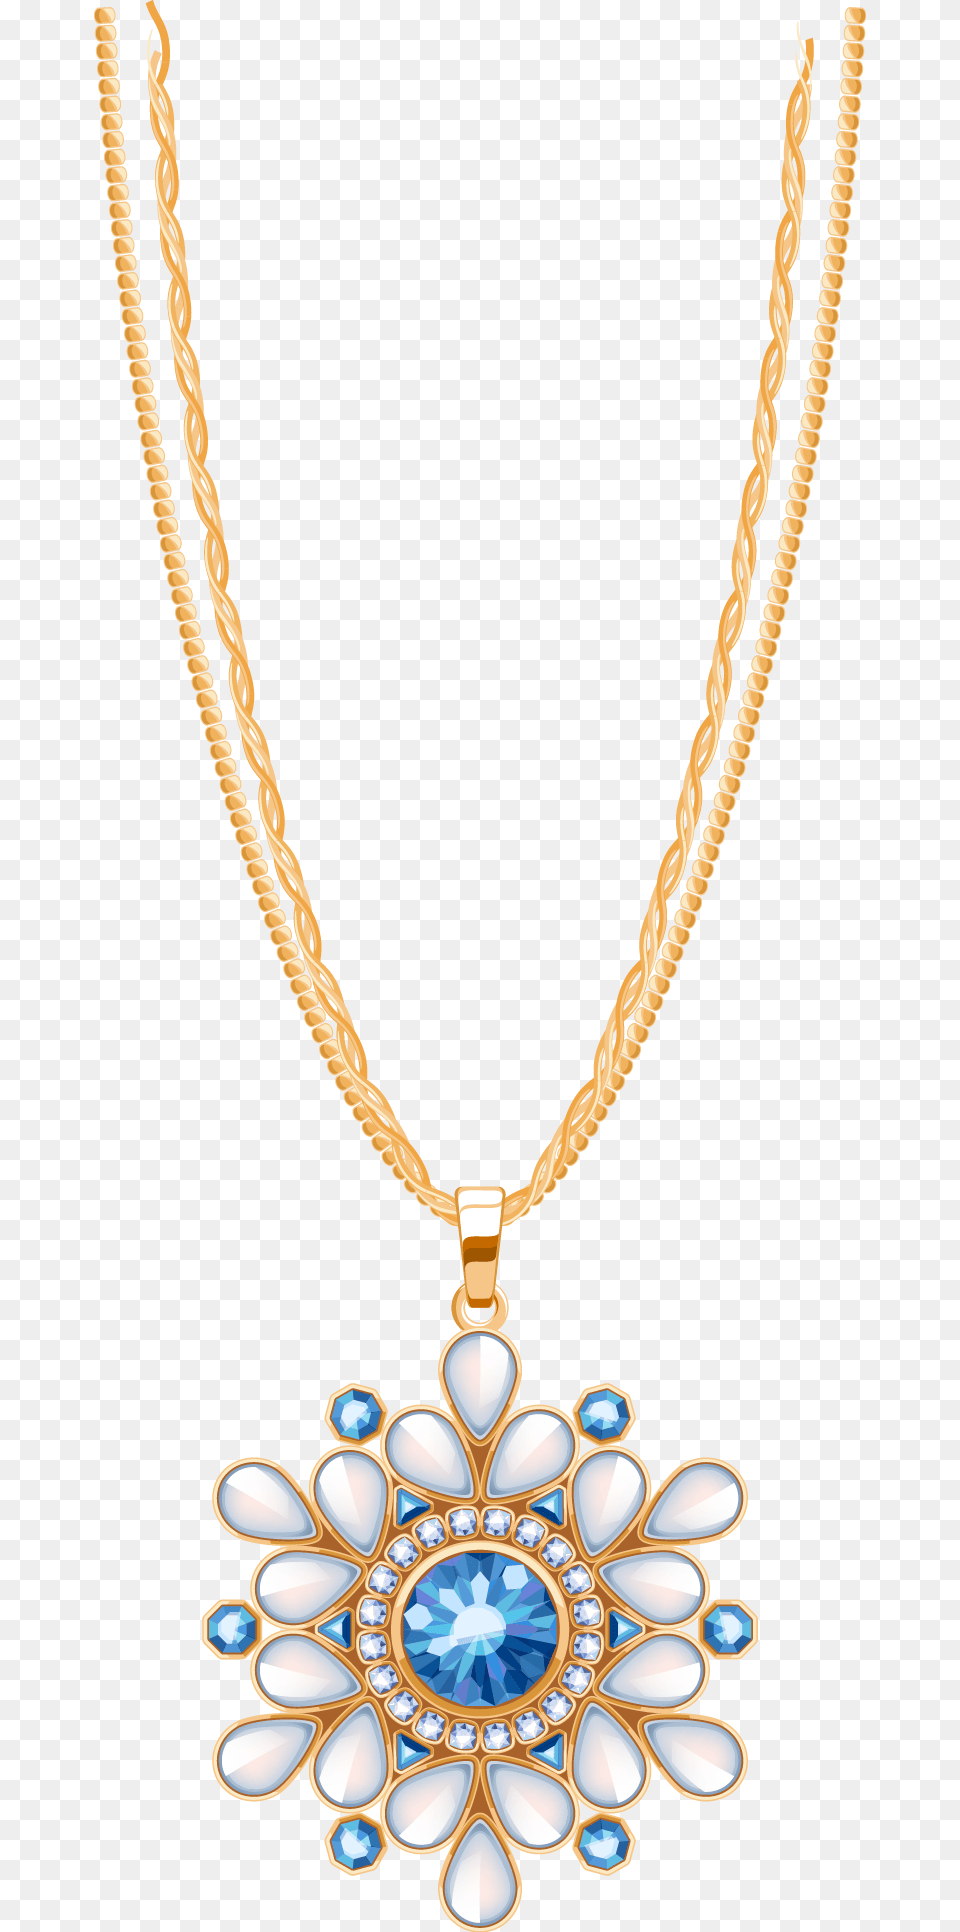 Diamond Chain Jewellery Dazzling Locket Pendant Necklace Necklace, Accessories, Jewelry, Gemstone Free Png